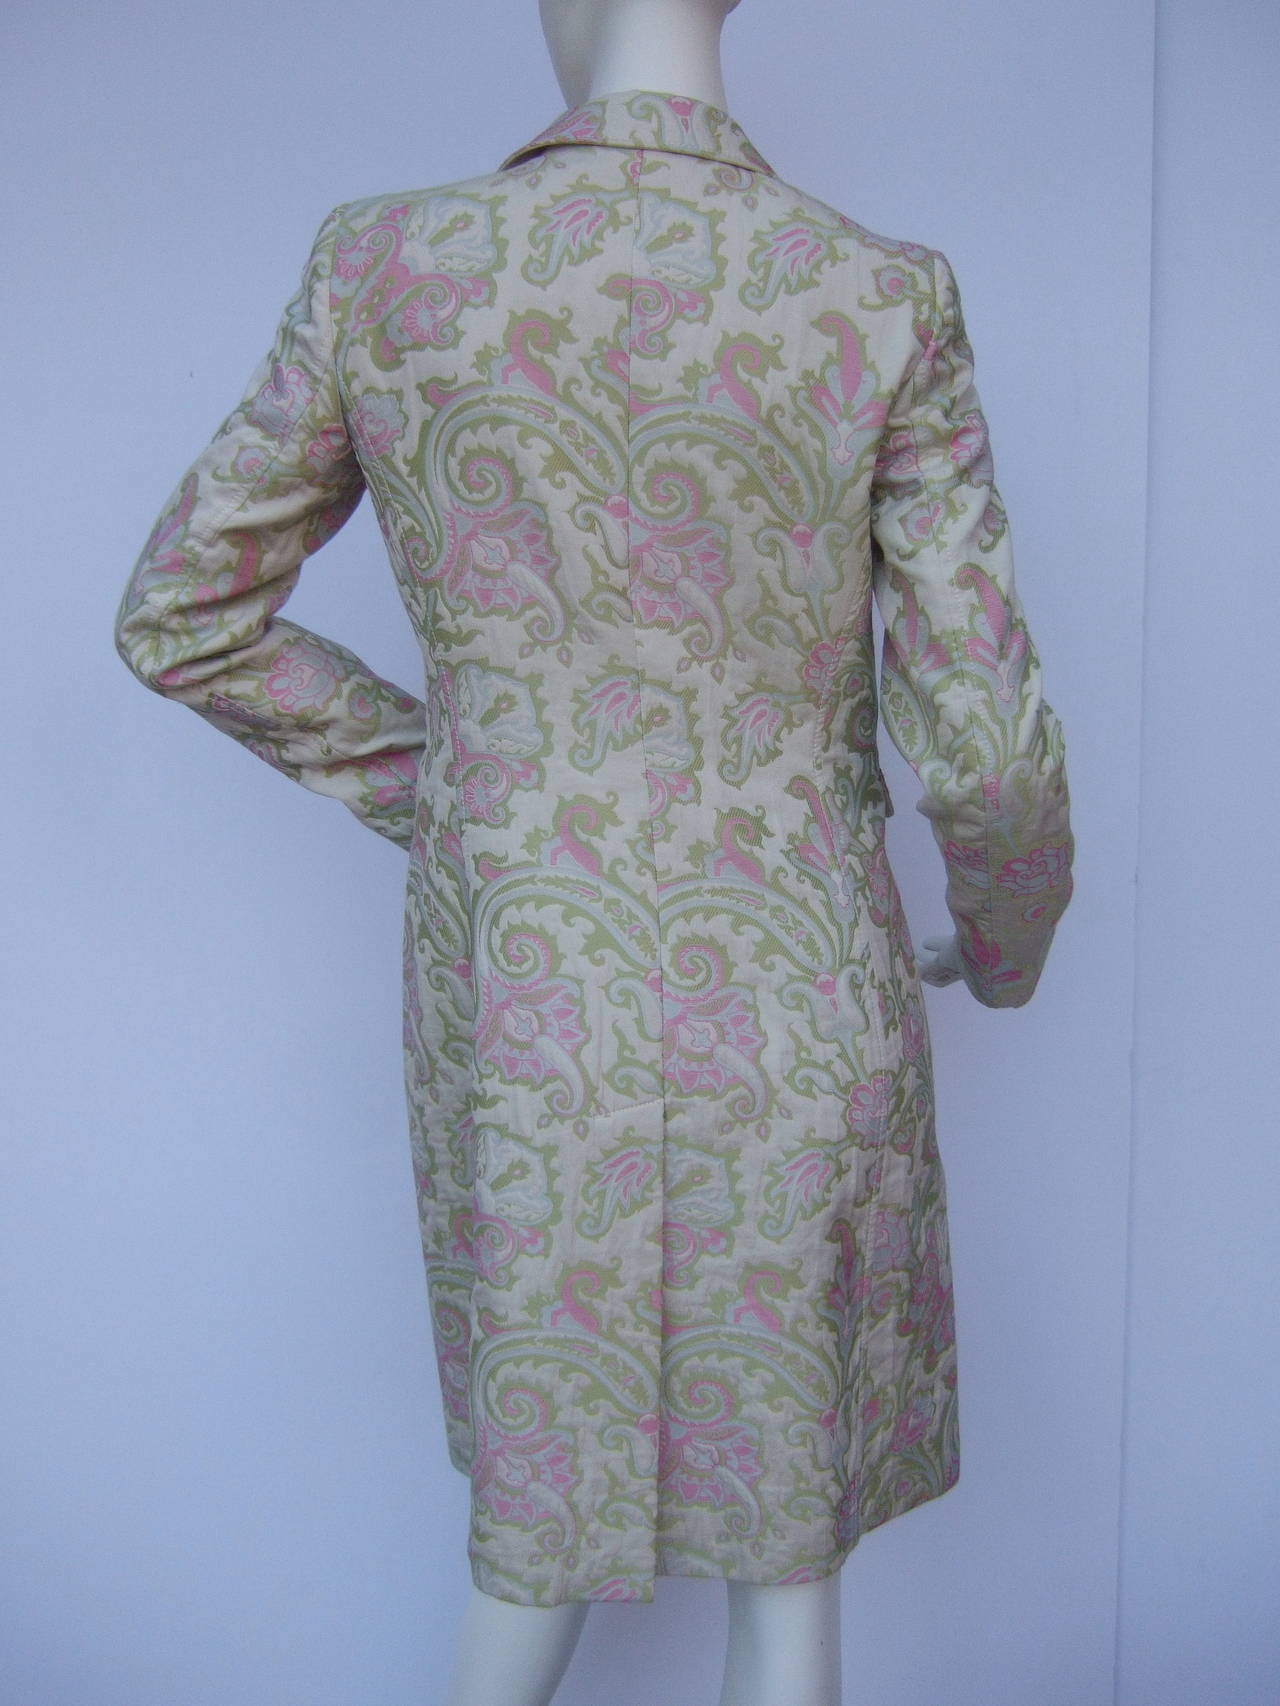 Women's Etro Milano Paisley Floral Pink & Green Coat Size 40